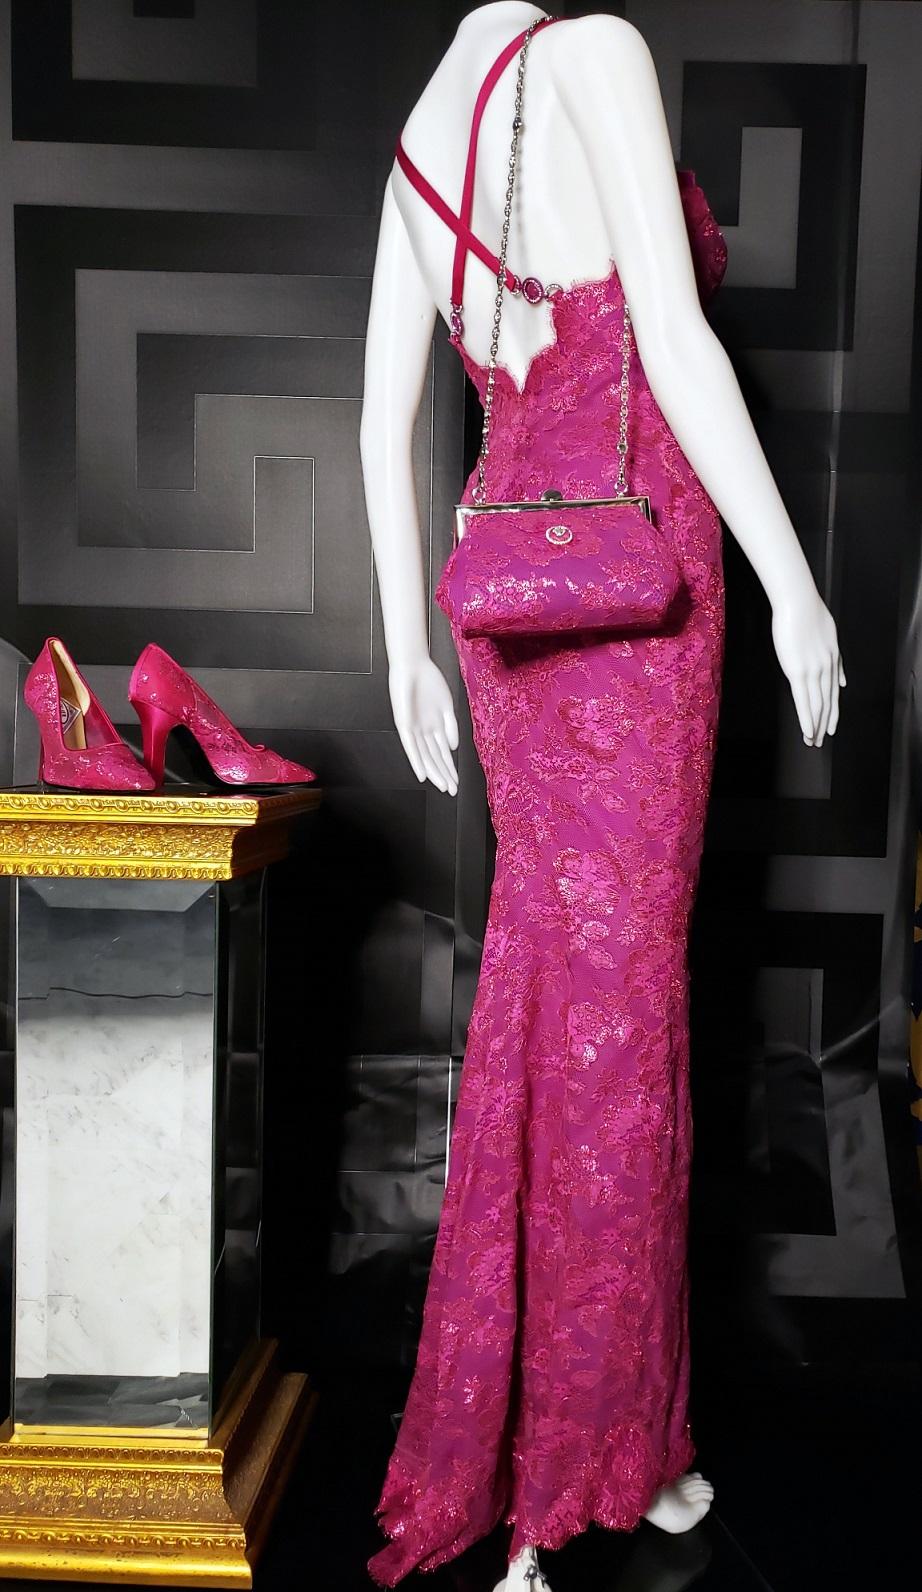 Pink S/S 1996 ICONIC VINTAGE VERSACE ATELIER PINK LACE GOWN as seen in MET MUSEUM